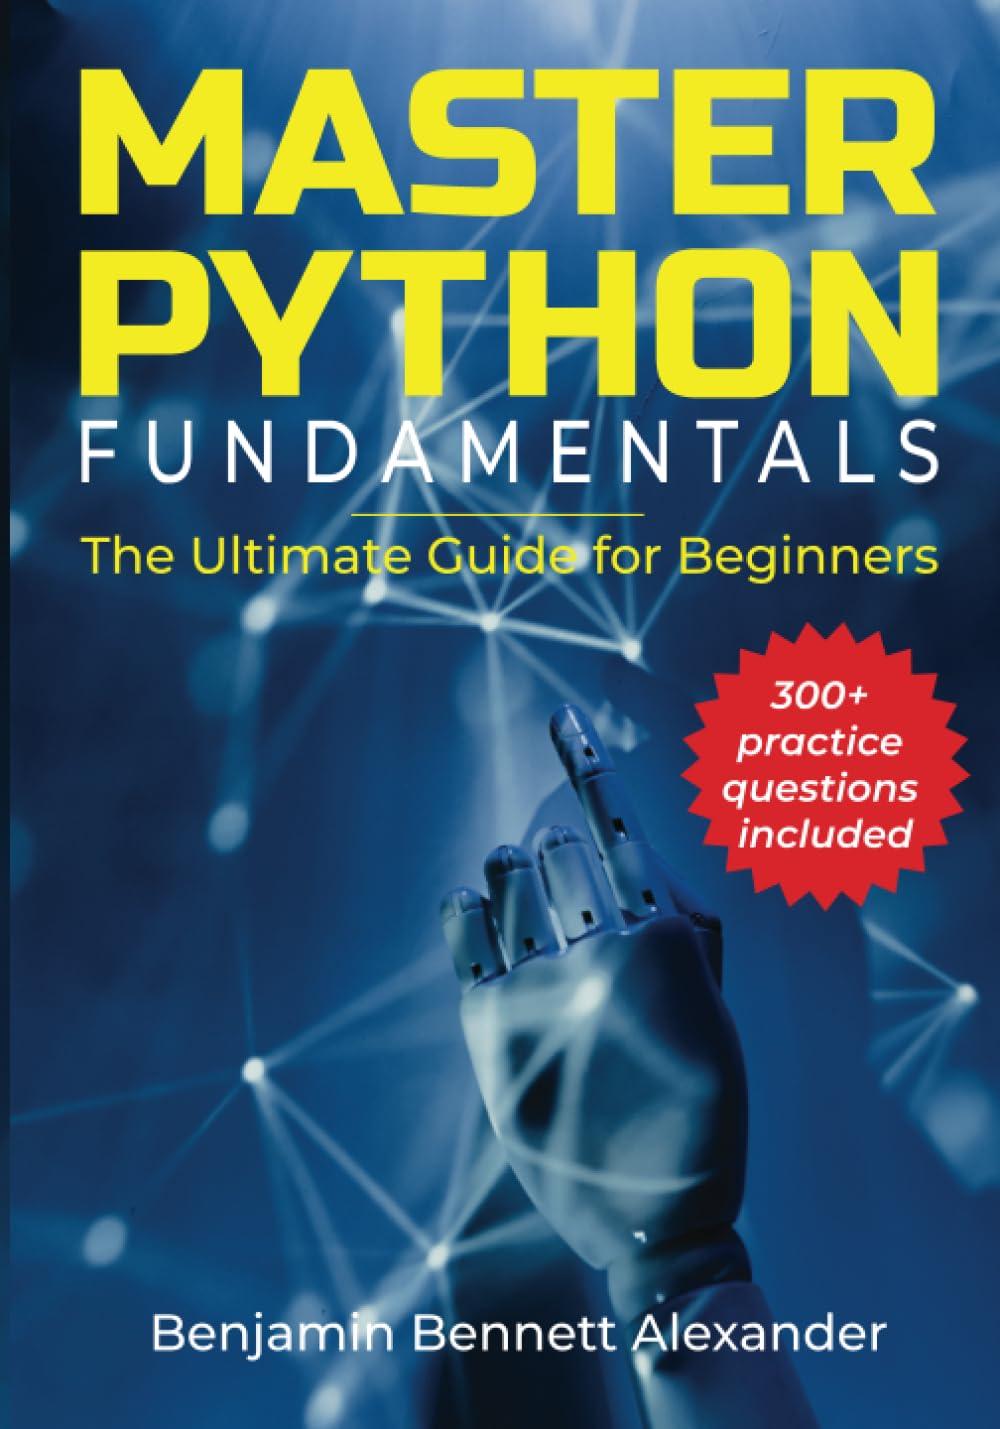 master python fundamentals the ultimate guide for beginners hands on practice questions 1st edition benjamin